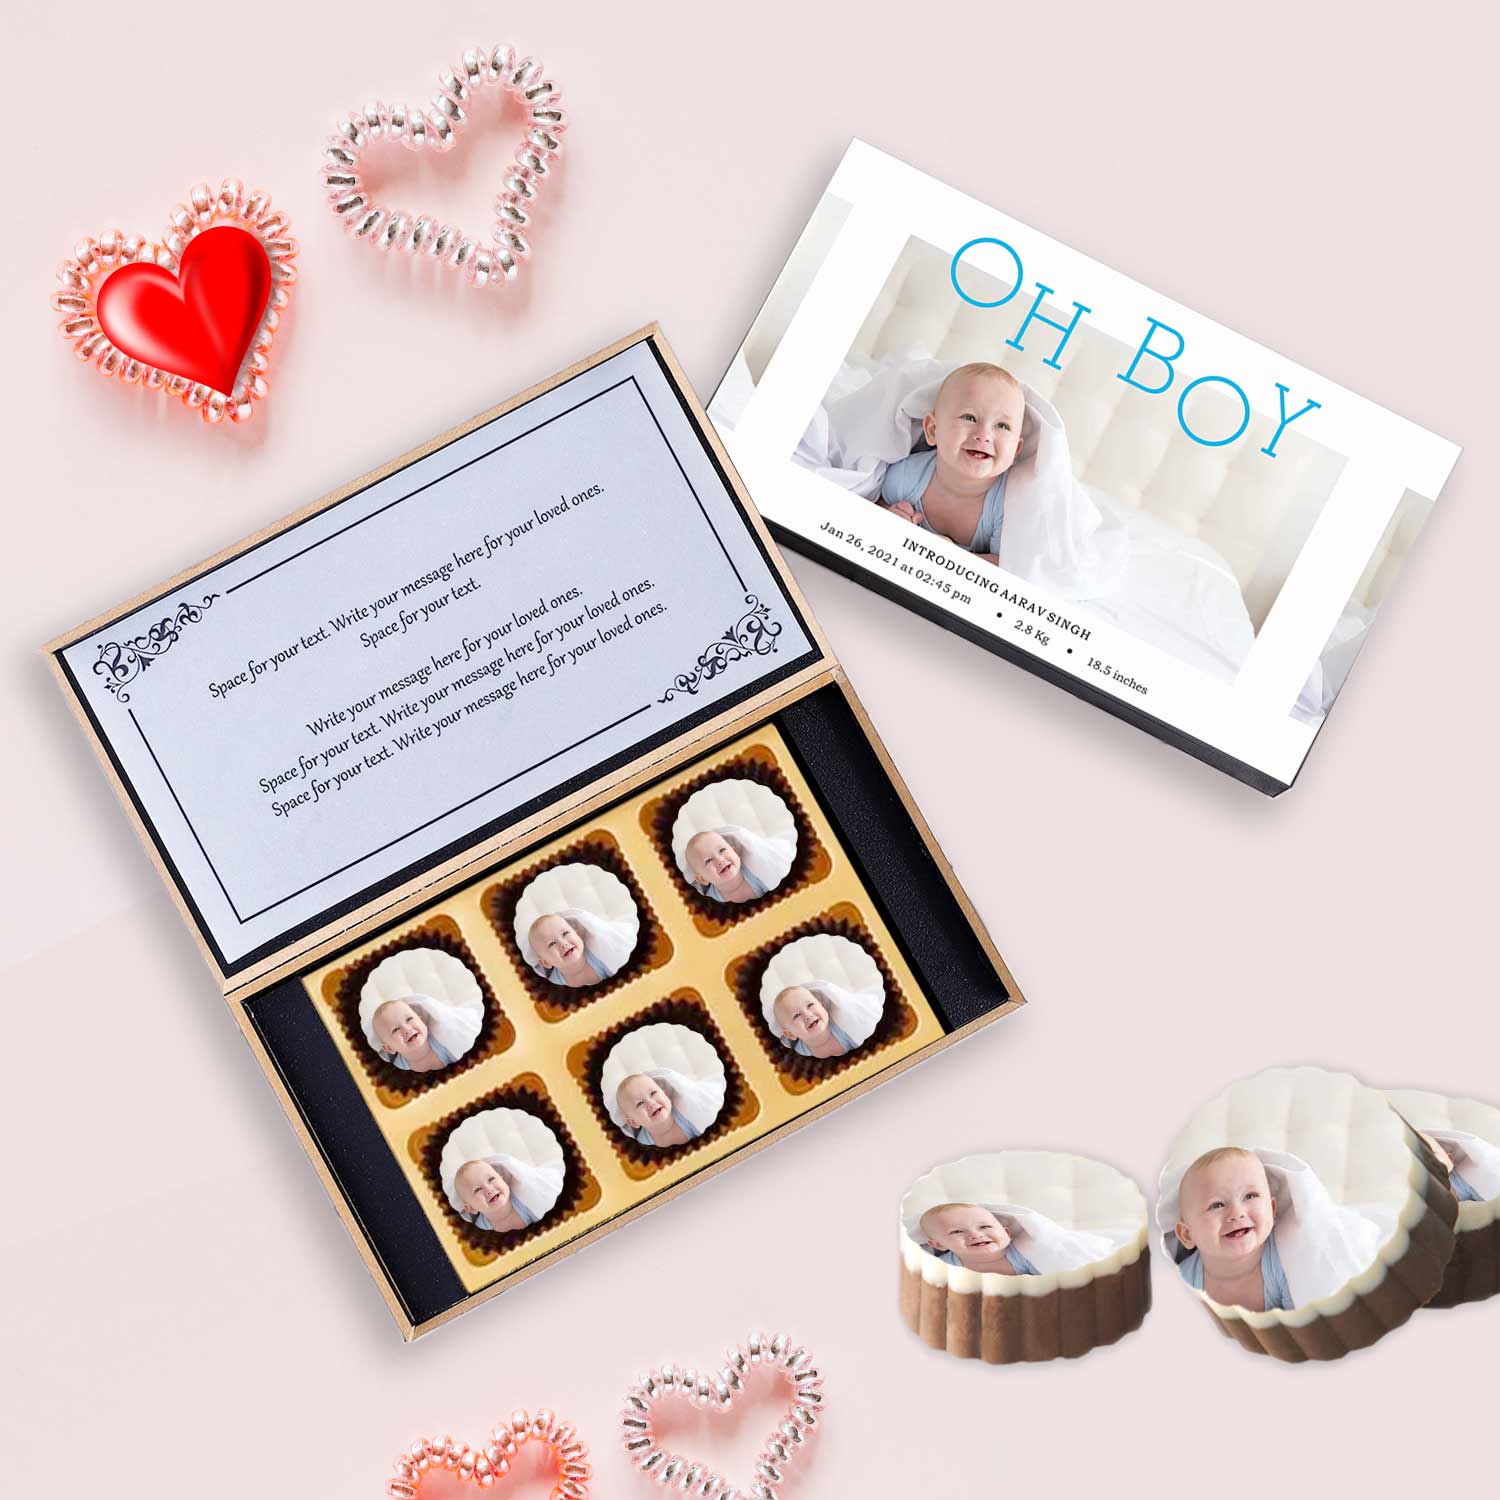 "Oh Boy" printed baby boy announcement chocolates gift